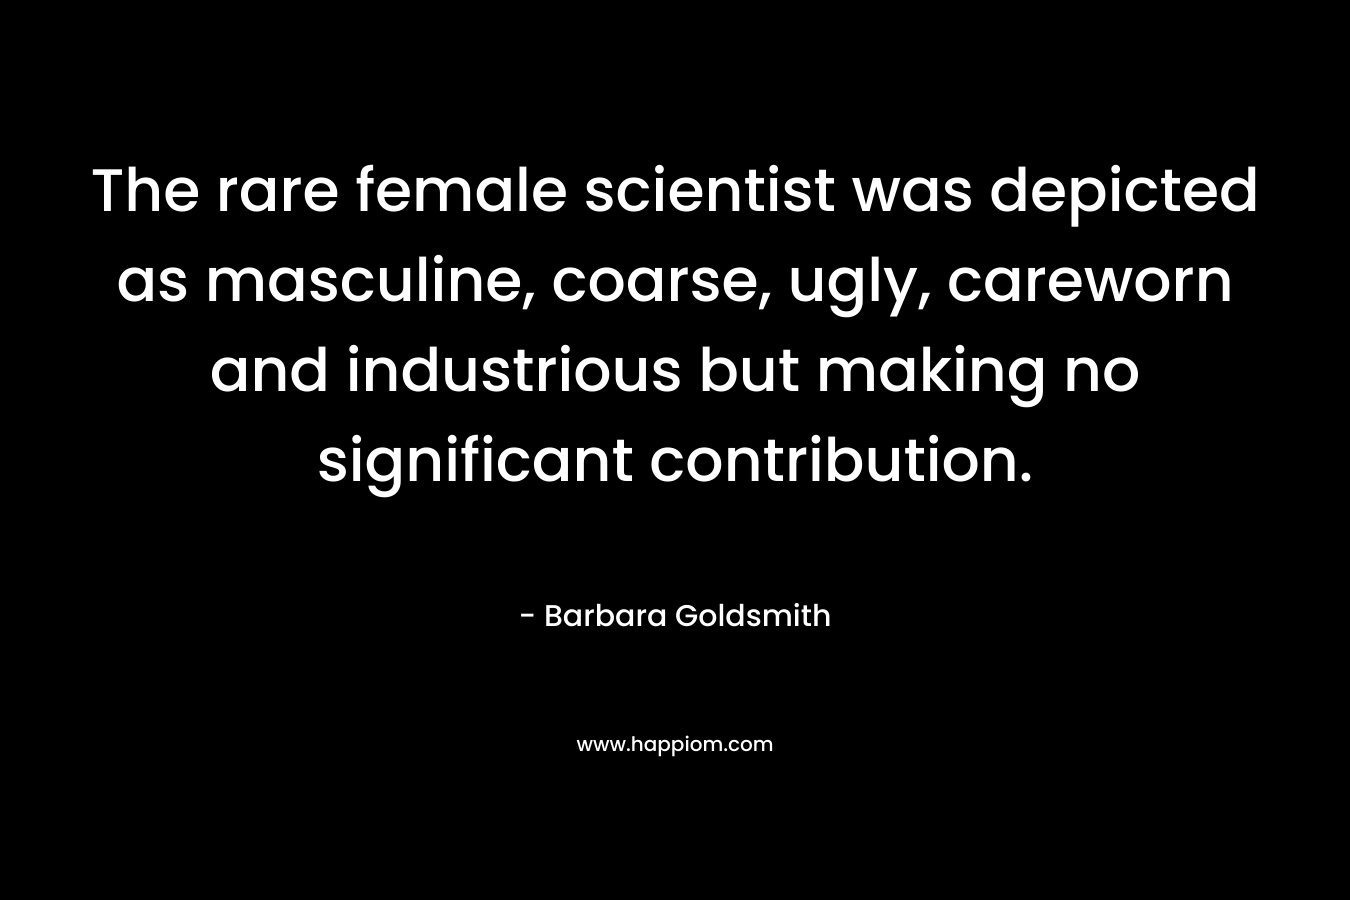 The rare female scientist was depicted as masculine, coarse, ugly, careworn and industrious but making no significant contribution. – Barbara Goldsmith